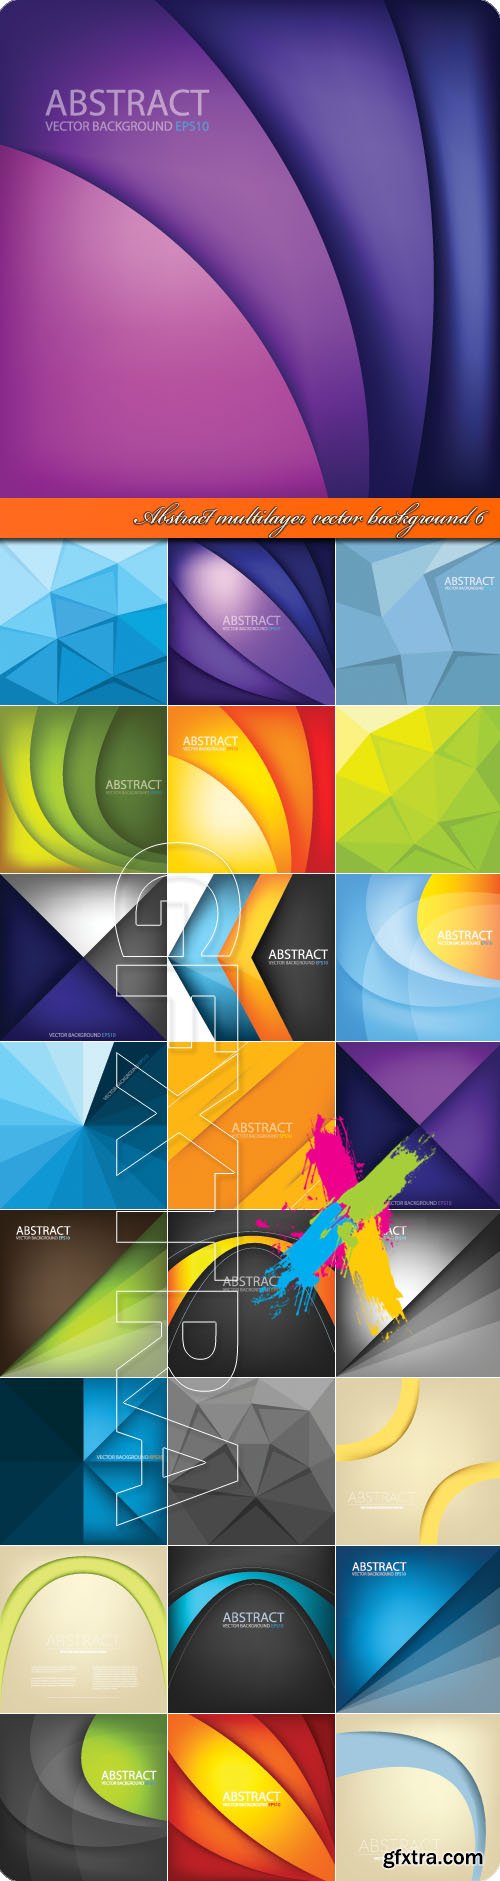 Abstract multilayer vector background 6